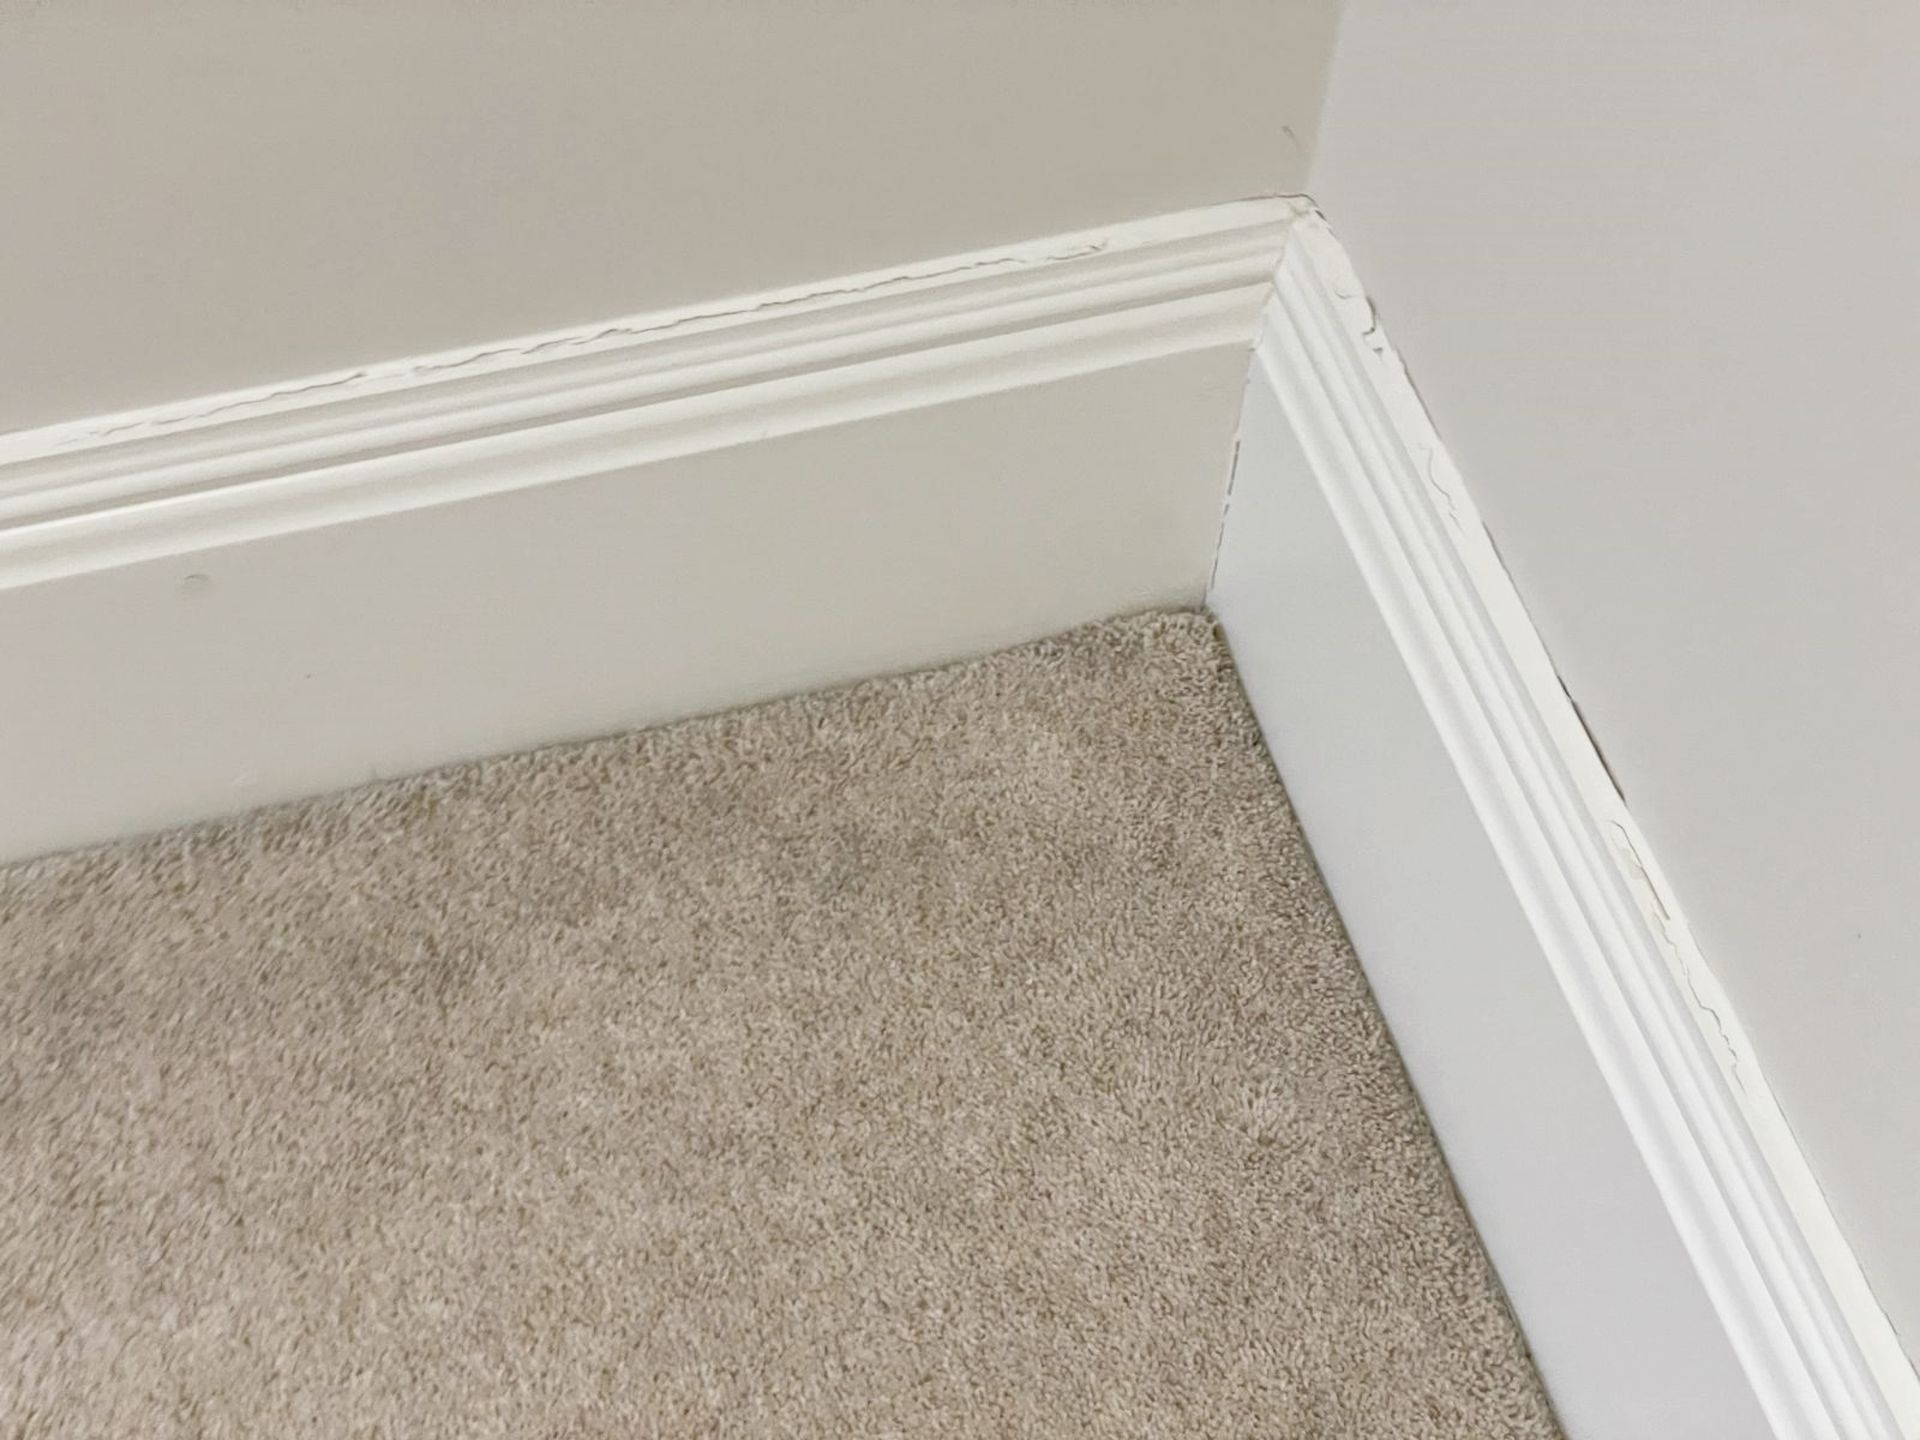 Approximately 16-Metres of Painted Timber Wooden Skirting Boards, In White - Ref: PAN283 / Bed4 - - Image 5 of 6